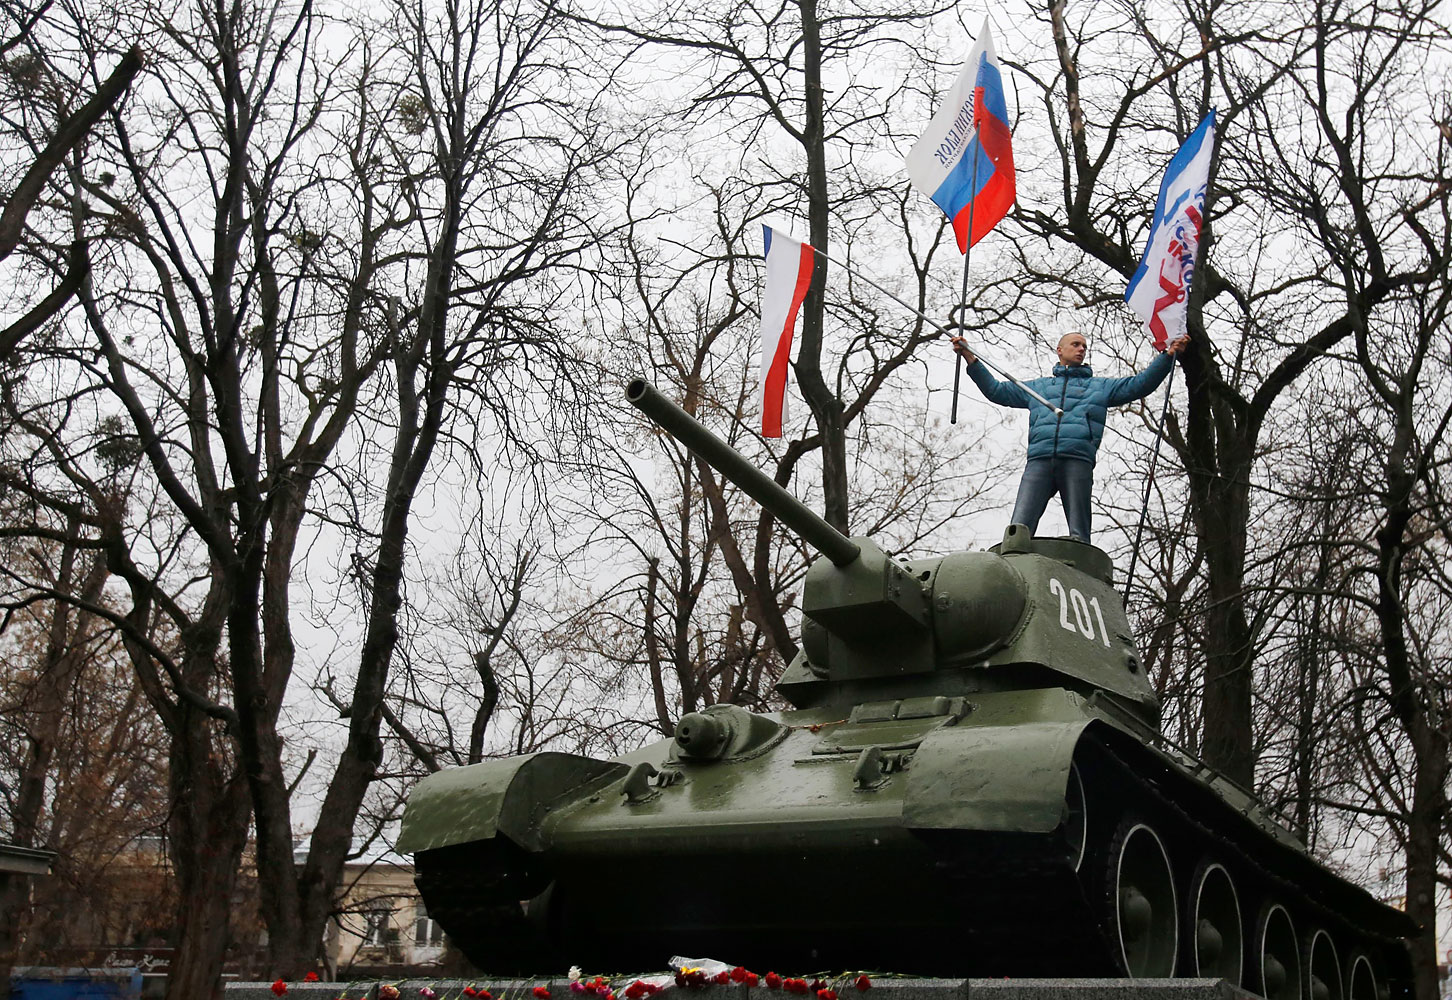 A Pro-Russian demonstrator waves Russian and Crimea flags atop an old Soviet Army tank during a protest in front of a local government building in Simferopol, Crimea, Ukraine, Feb. 27, 2014. (Darko Vojinovic—AP)